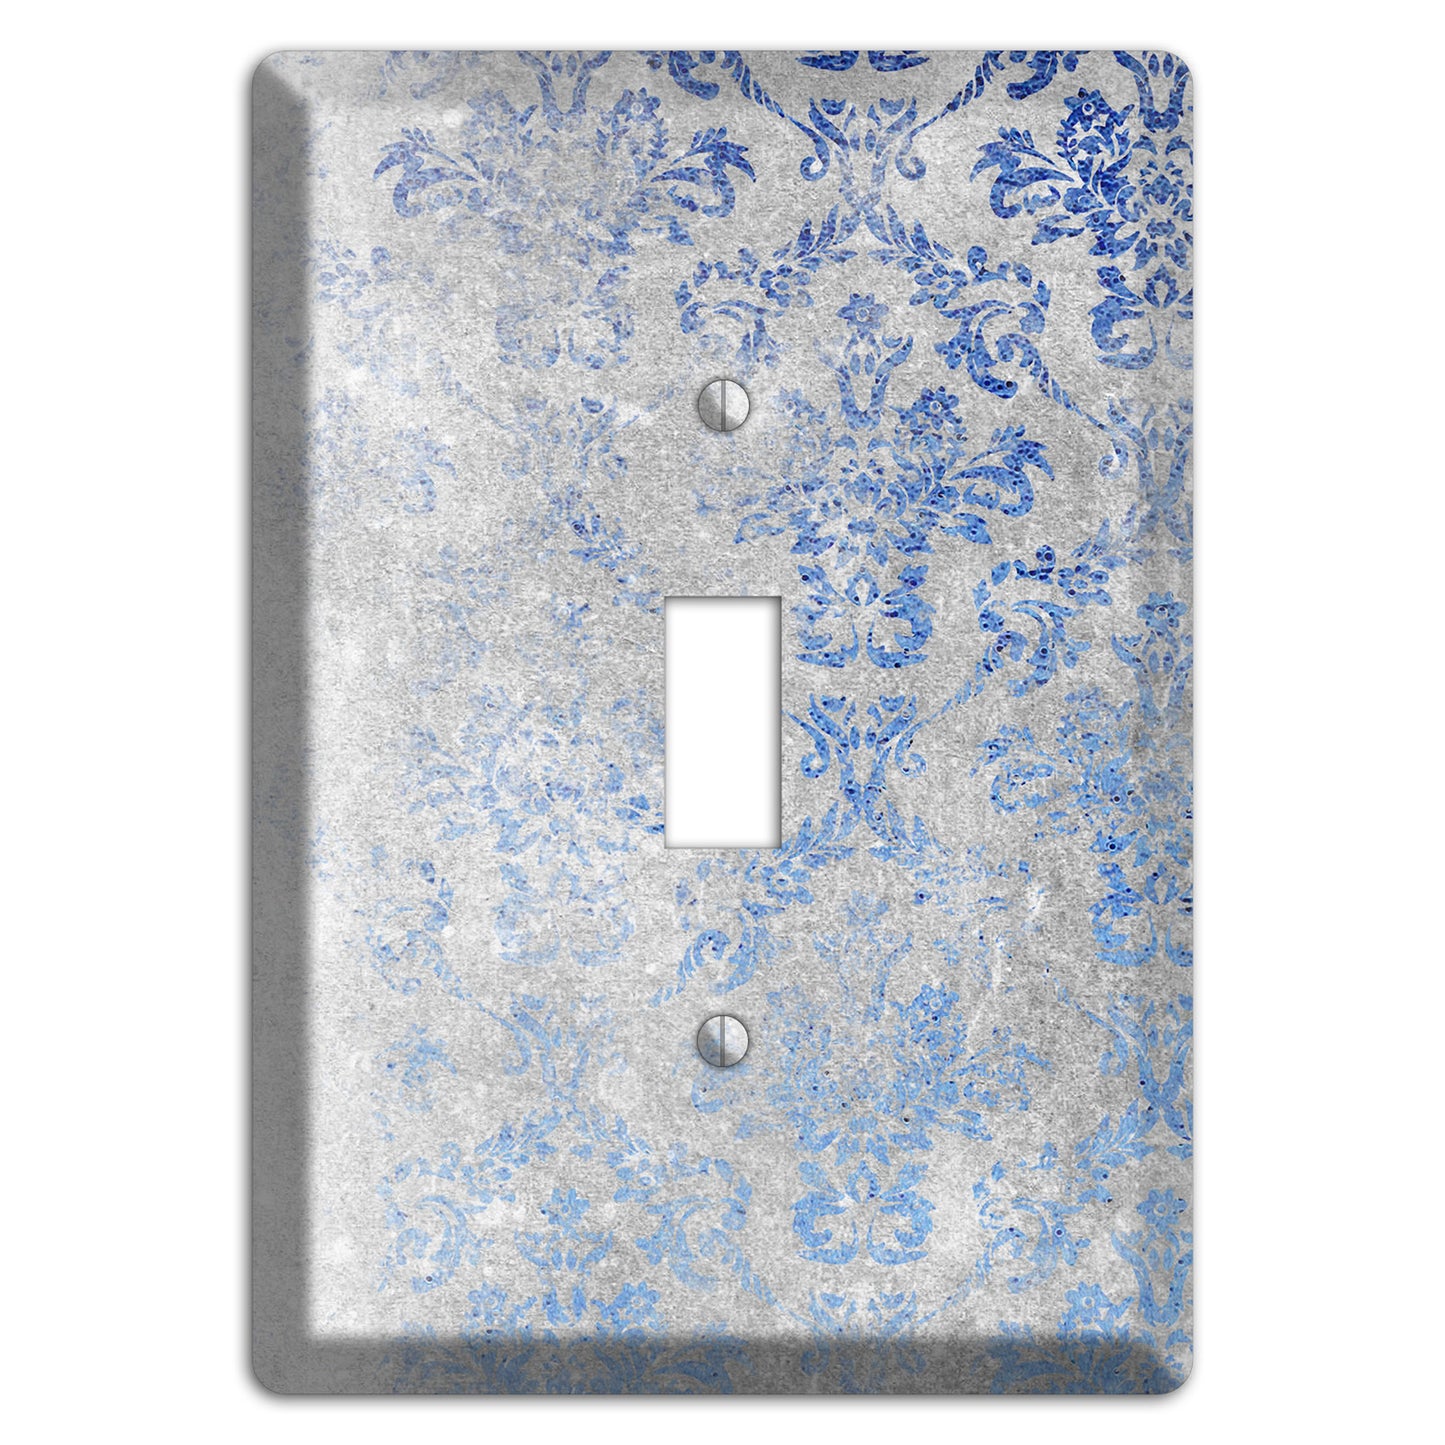 Loblolly Whimsical Damask Cover Plates